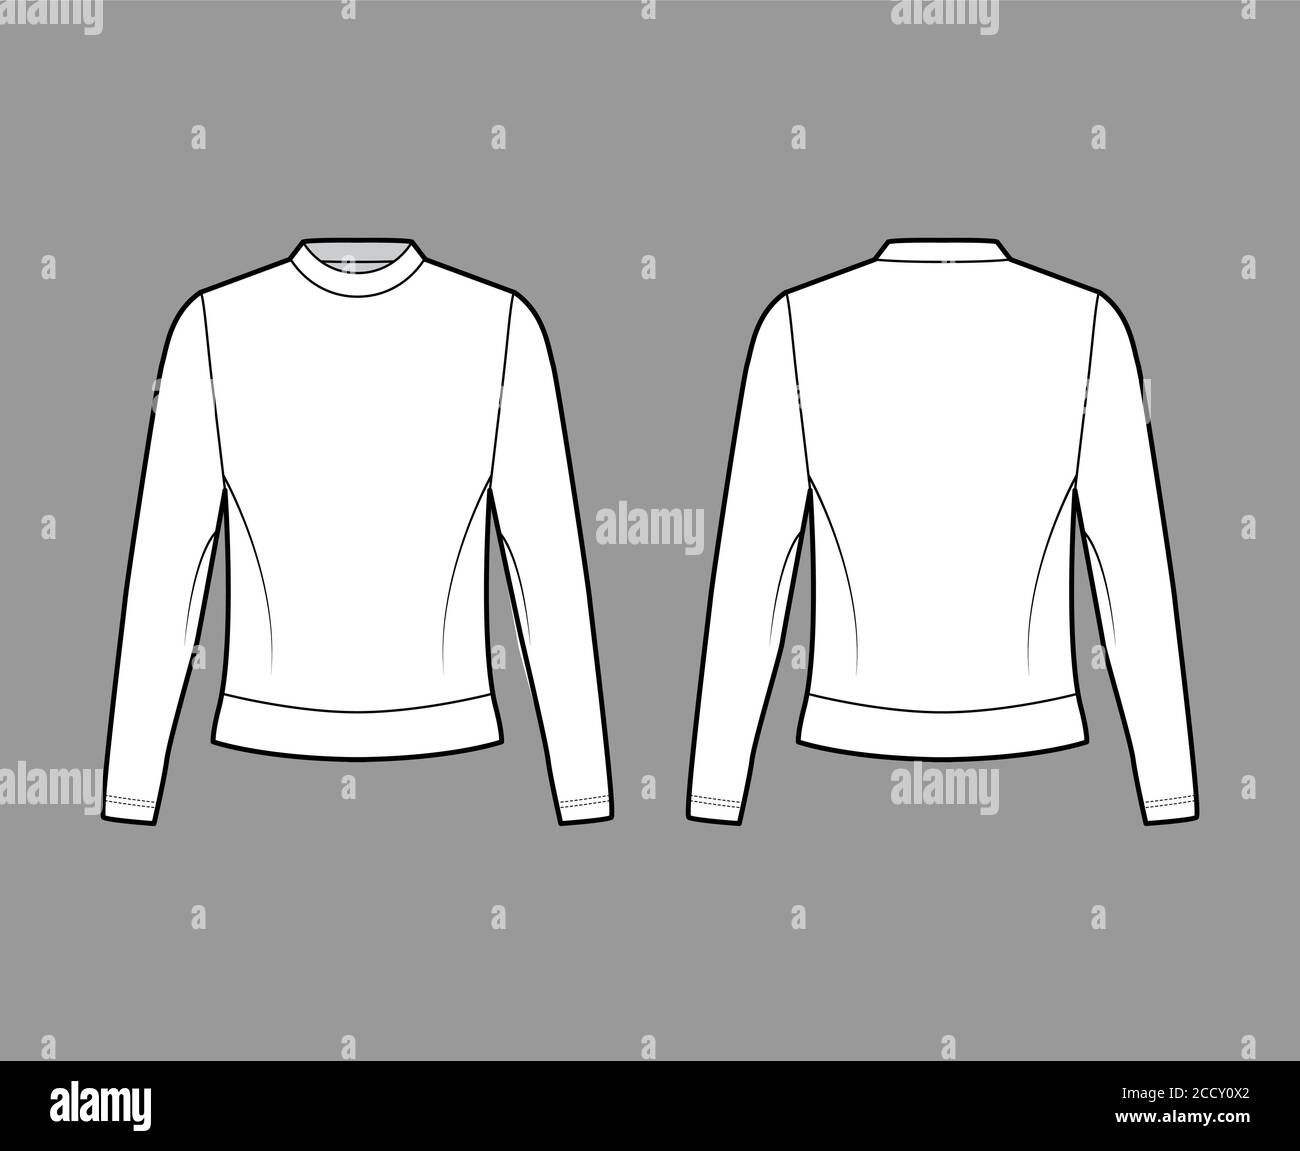 Cotton-terry sweatshirt technical fashion illustration with crew neckline, long sleeves, oversized. Flat jumper apparel outwear template front, back white color. Women, men, unisex top CAD mockup Stock Vector